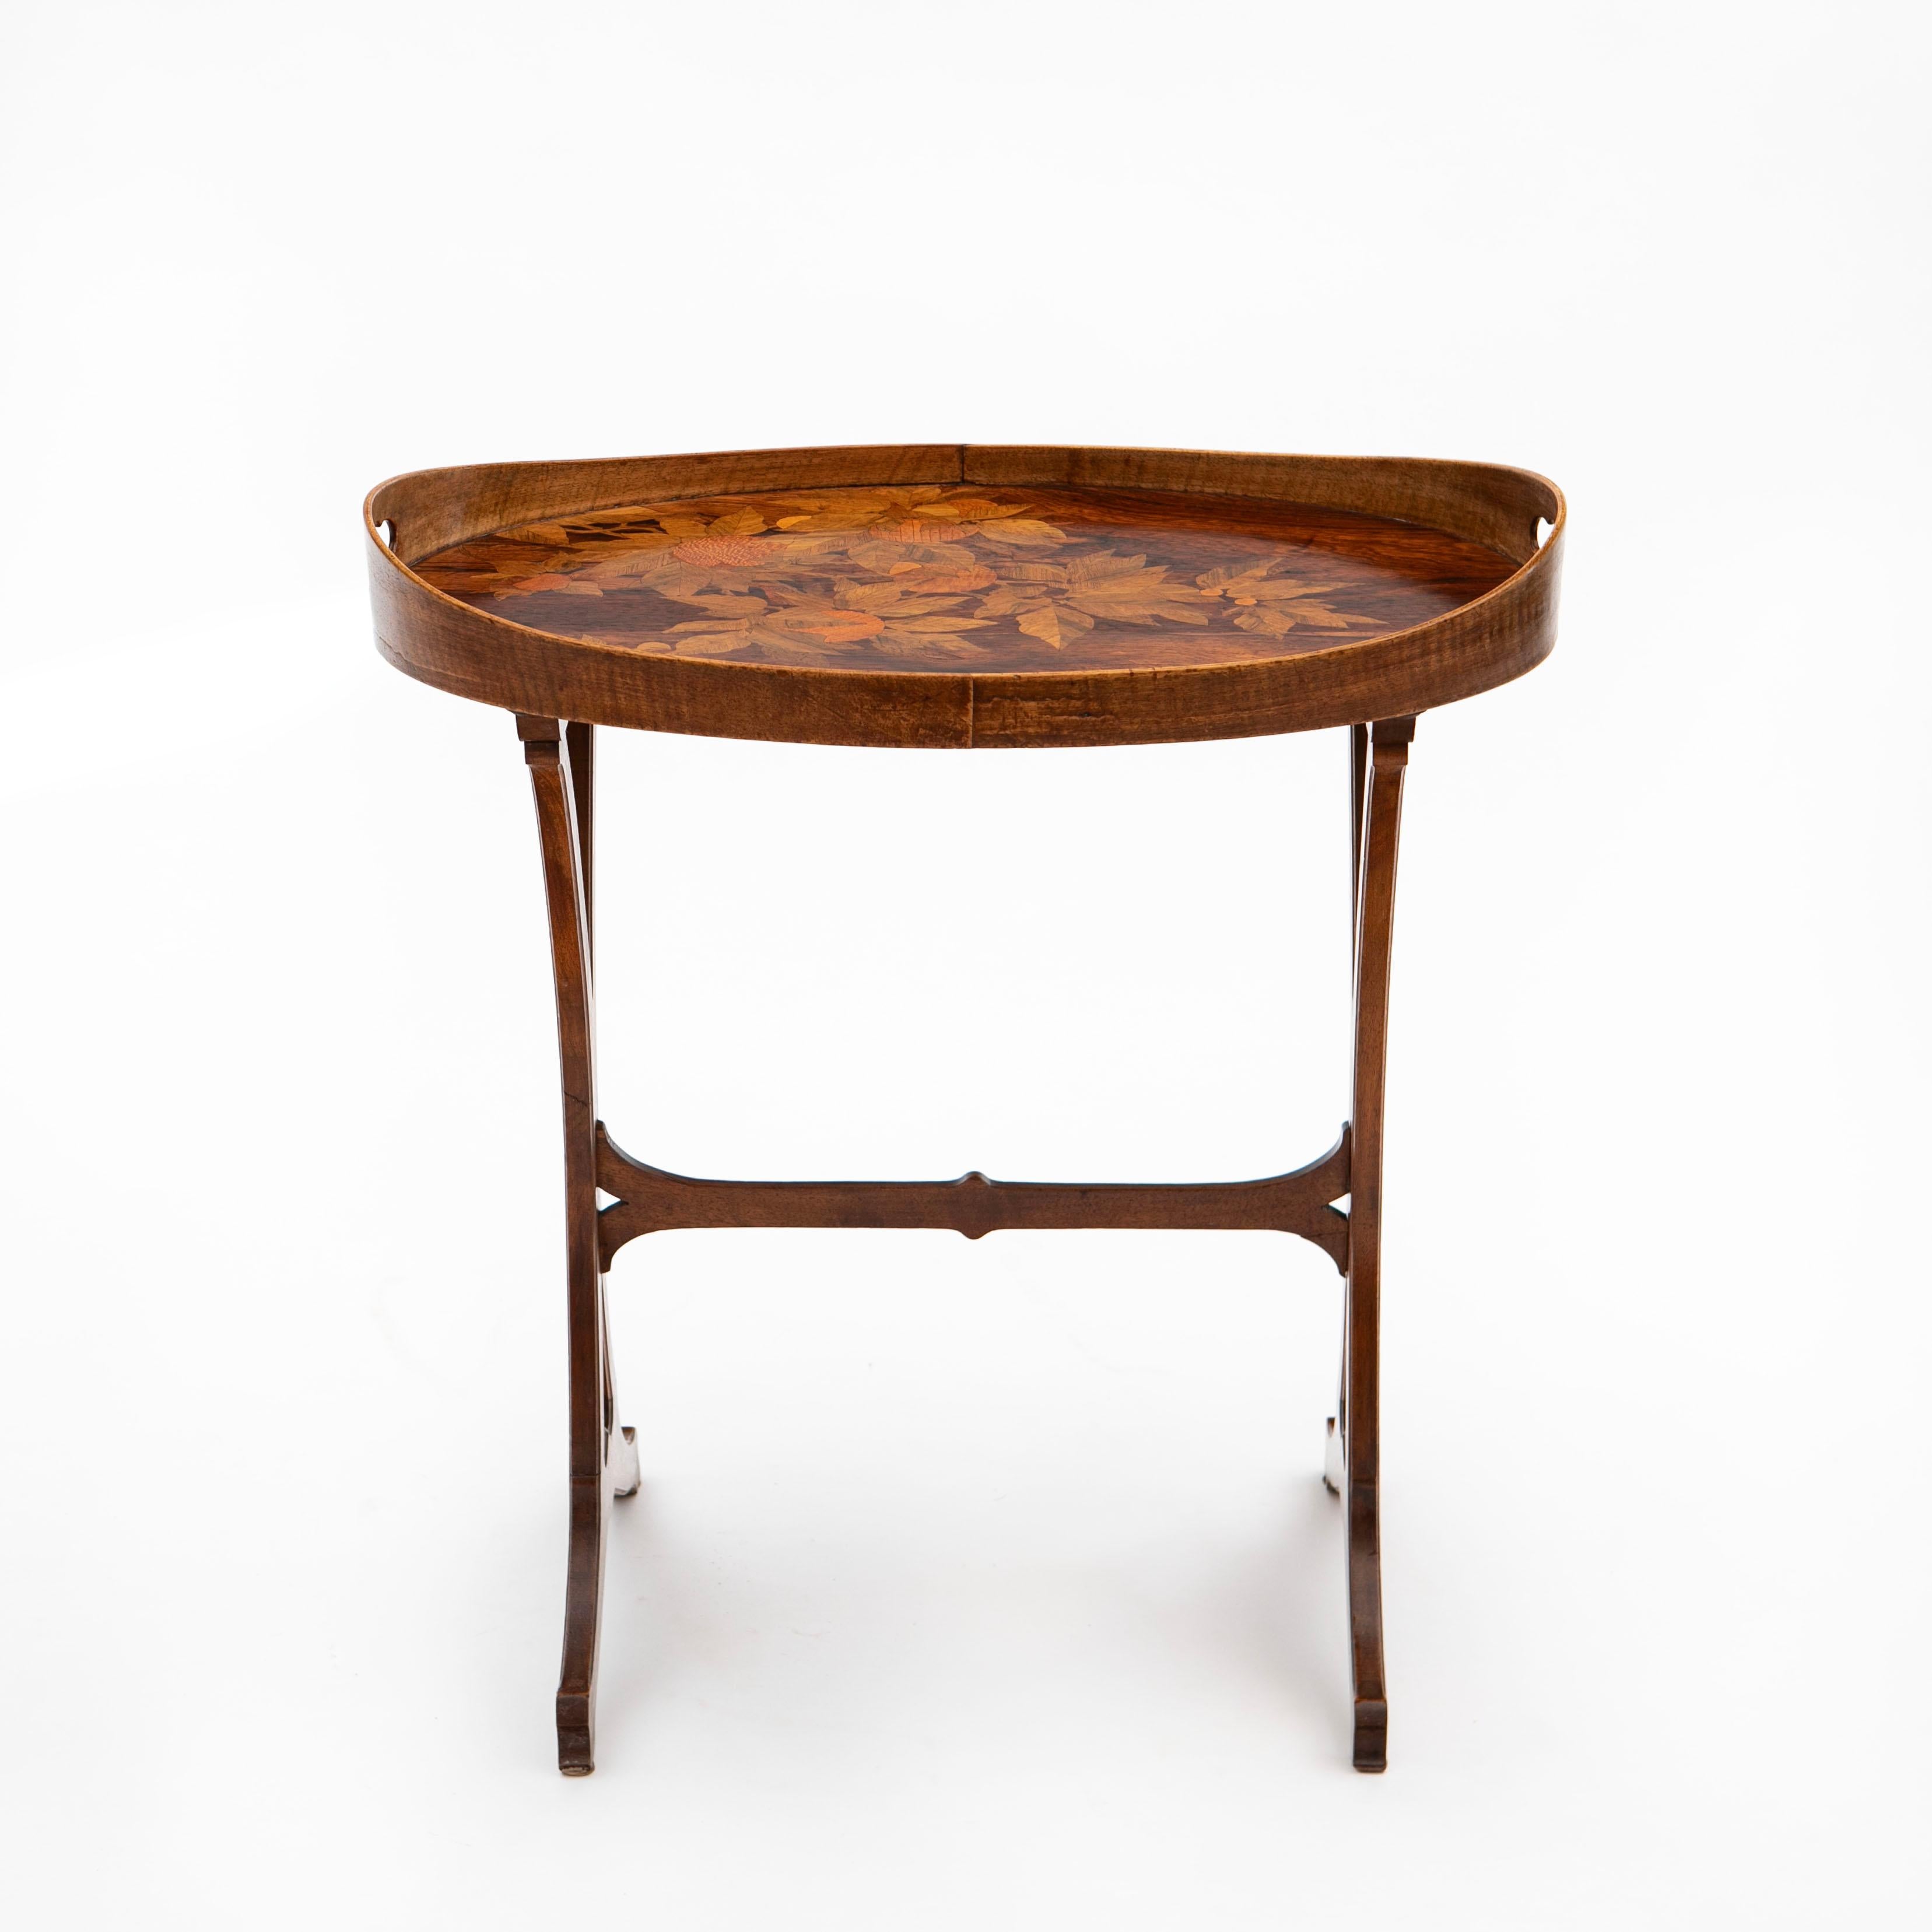 Emile Gallé, 1846-1904
A French Art Nouveau tray table crafted in walnut.
Table top features exquisite floral marquetry woodwork in fruitwood and different wood species.
With cabinetmaker sign: Gallé.
Untouched original good condition.
France